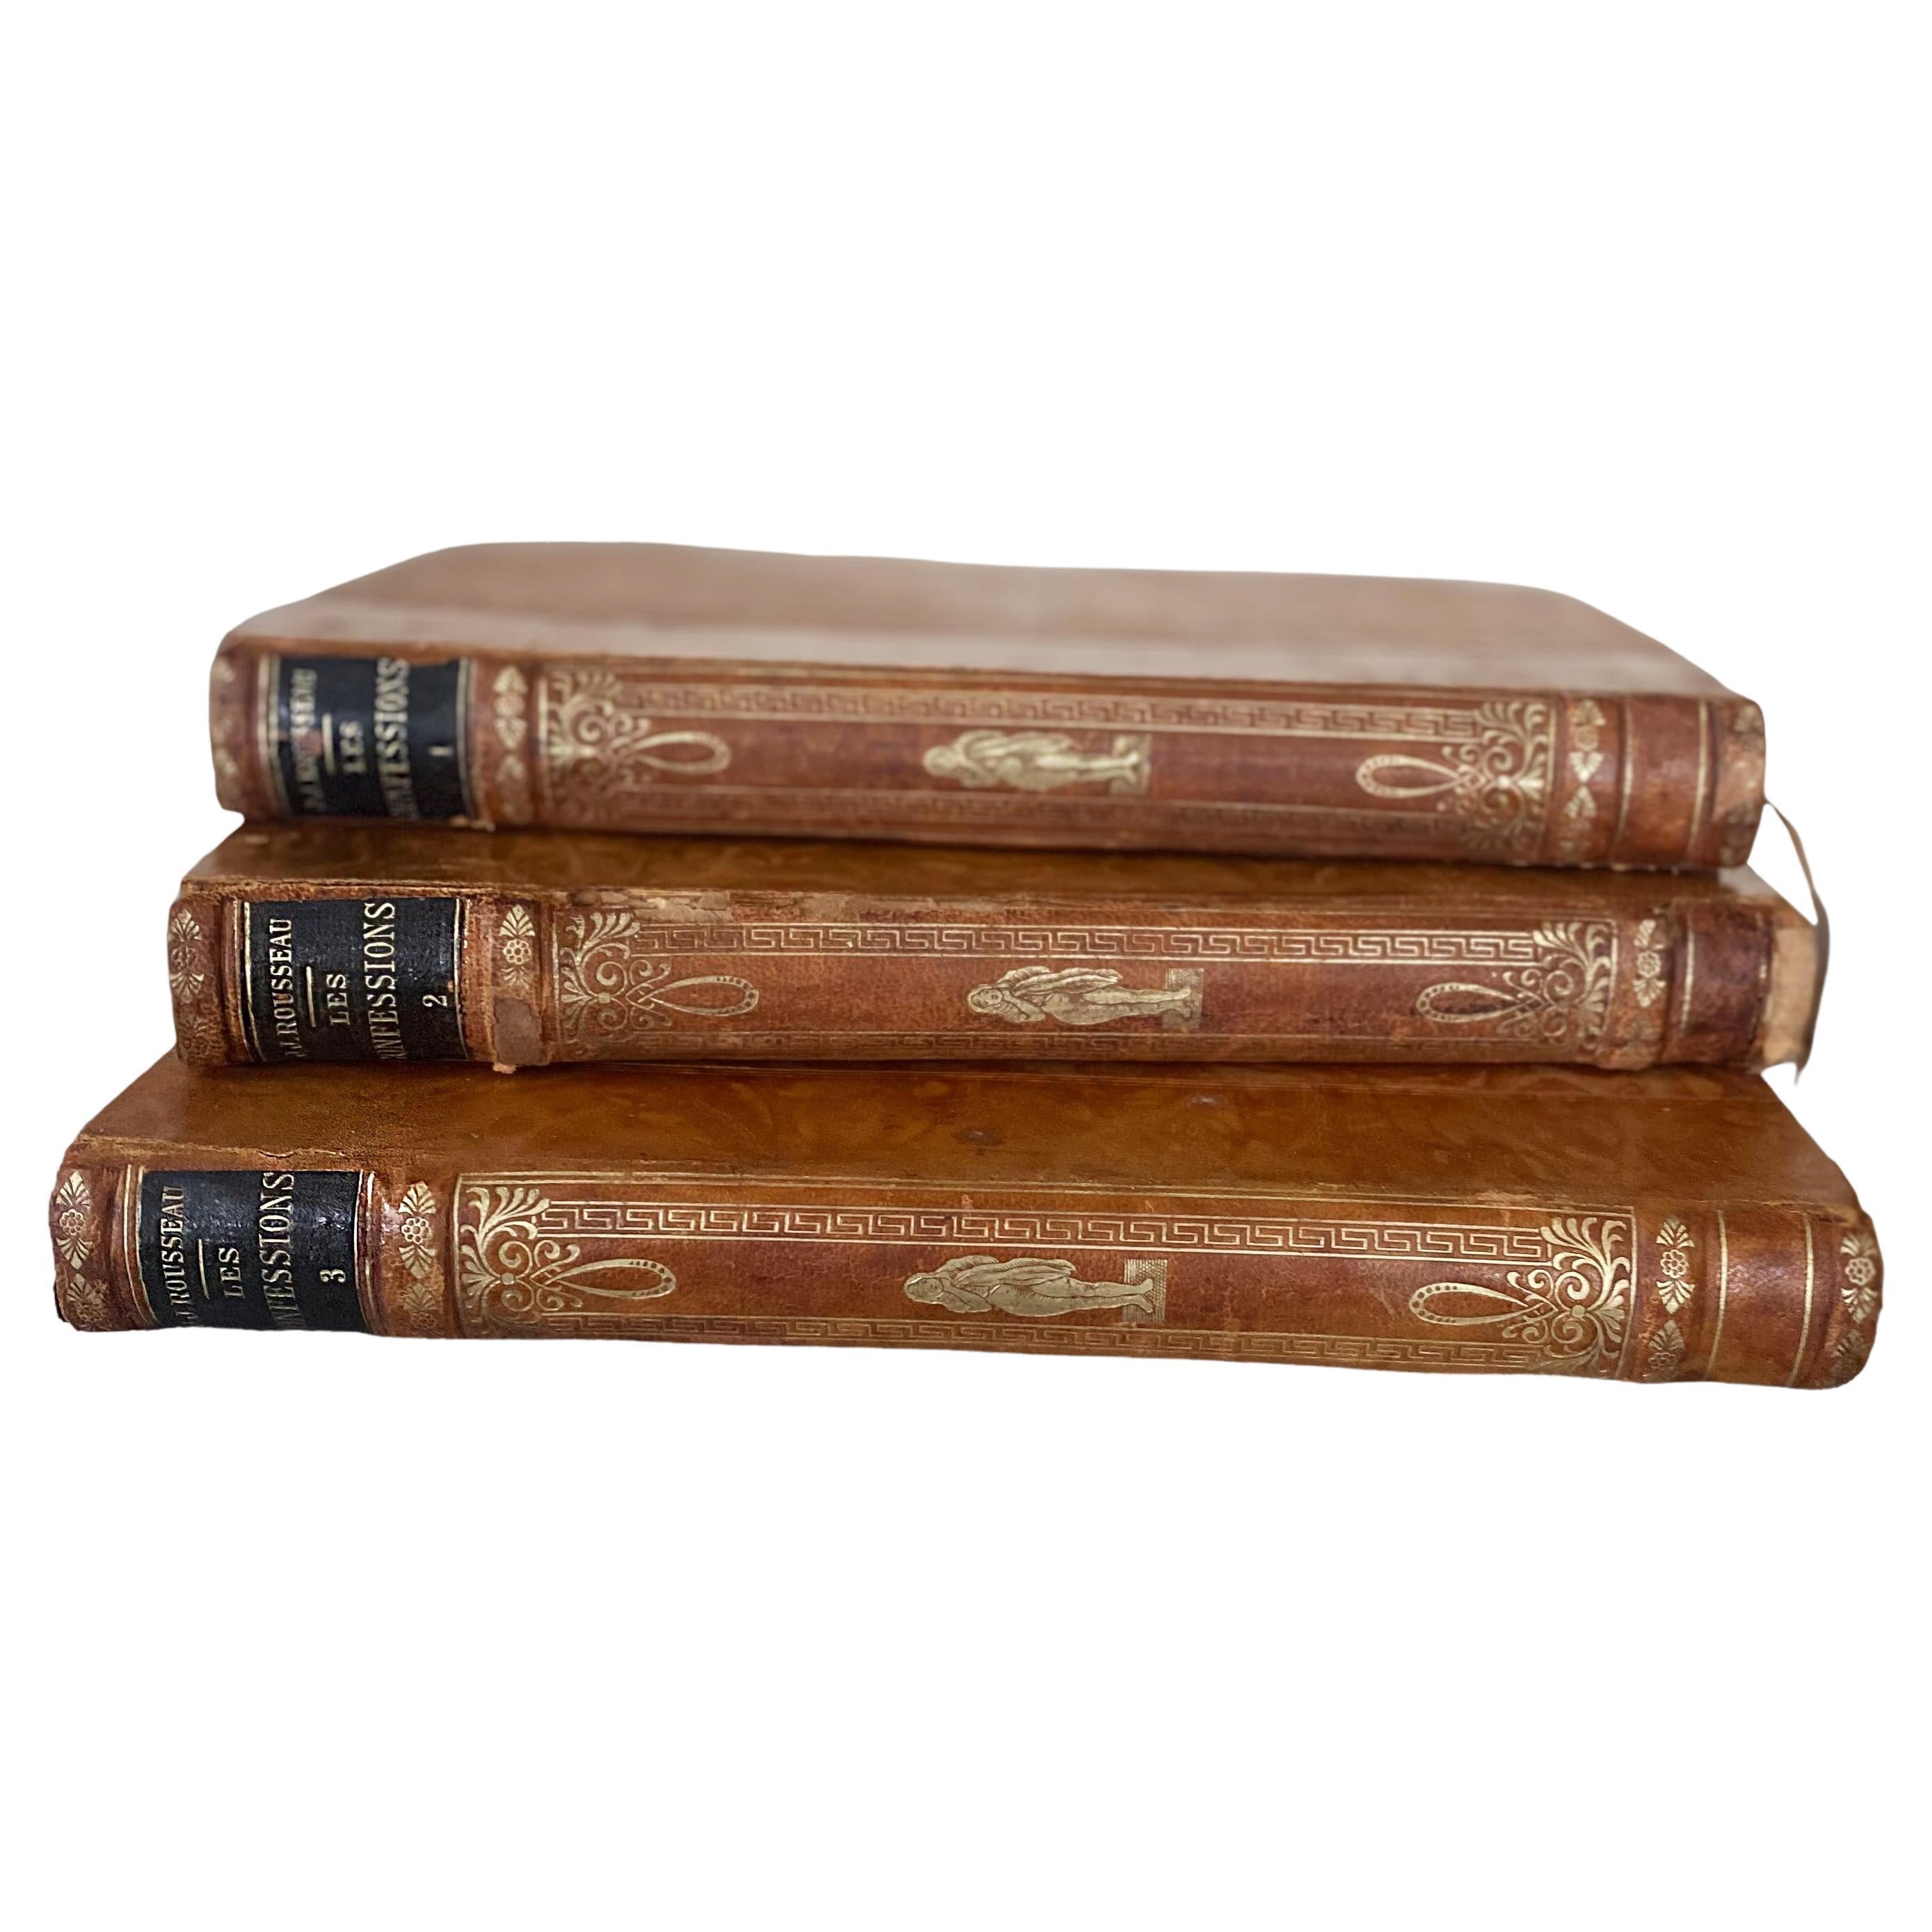 Les Confessions French Antique Books by J-J ROUSSEAU Leather Bound 3 Volumes 